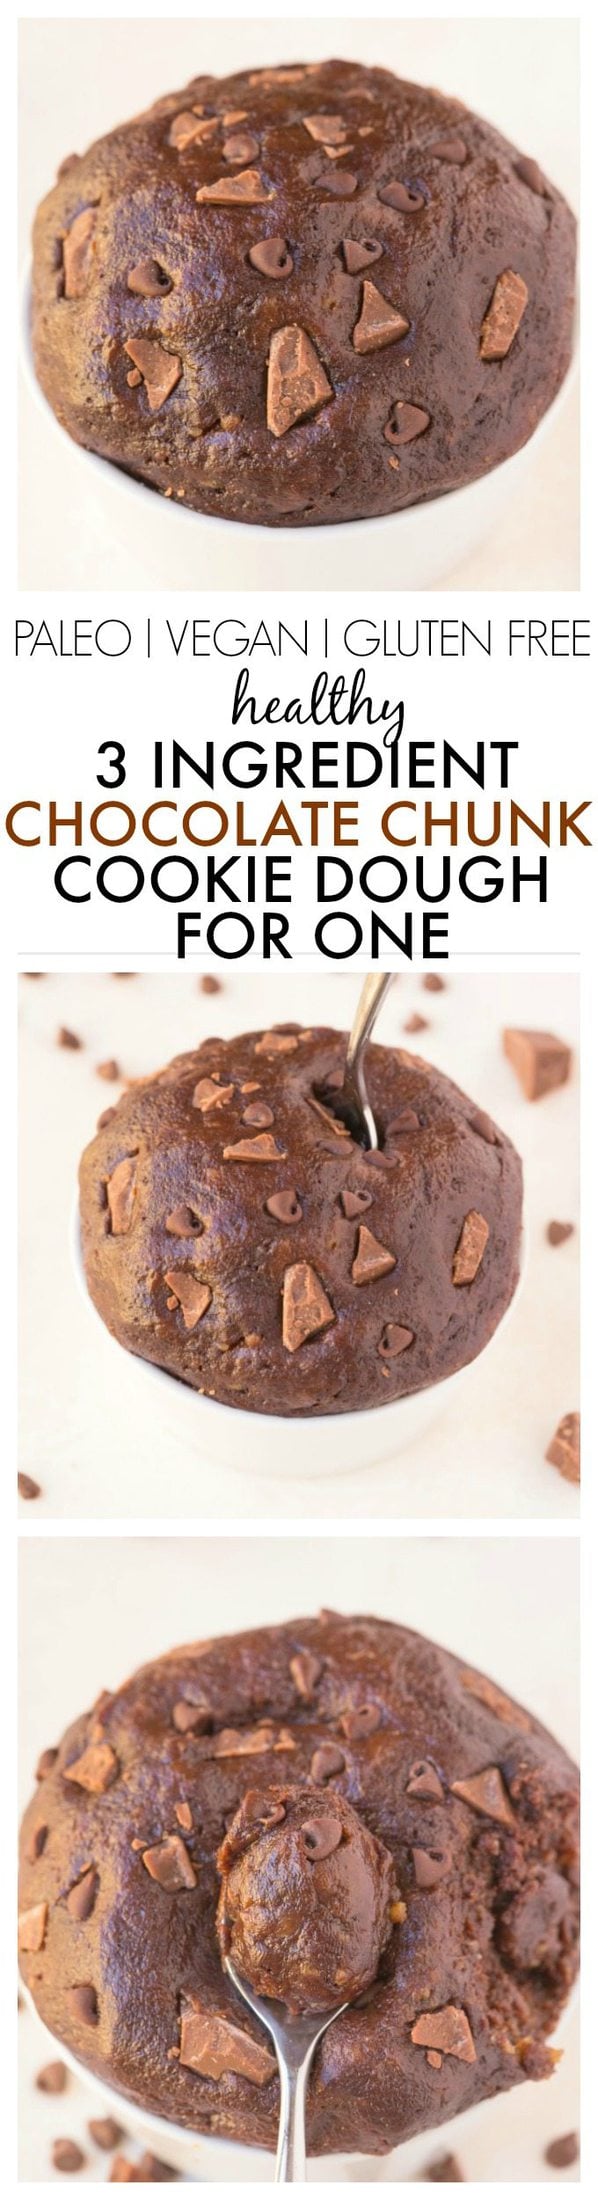 Healthy 3 Ingredient Chocolate Chunk Protein Cookie dough which is LOW carb, yet LOADED with chocolate chunks and chips! No baking required! {vegan, gluten free, paleo recipe}- thebigmansworld.com